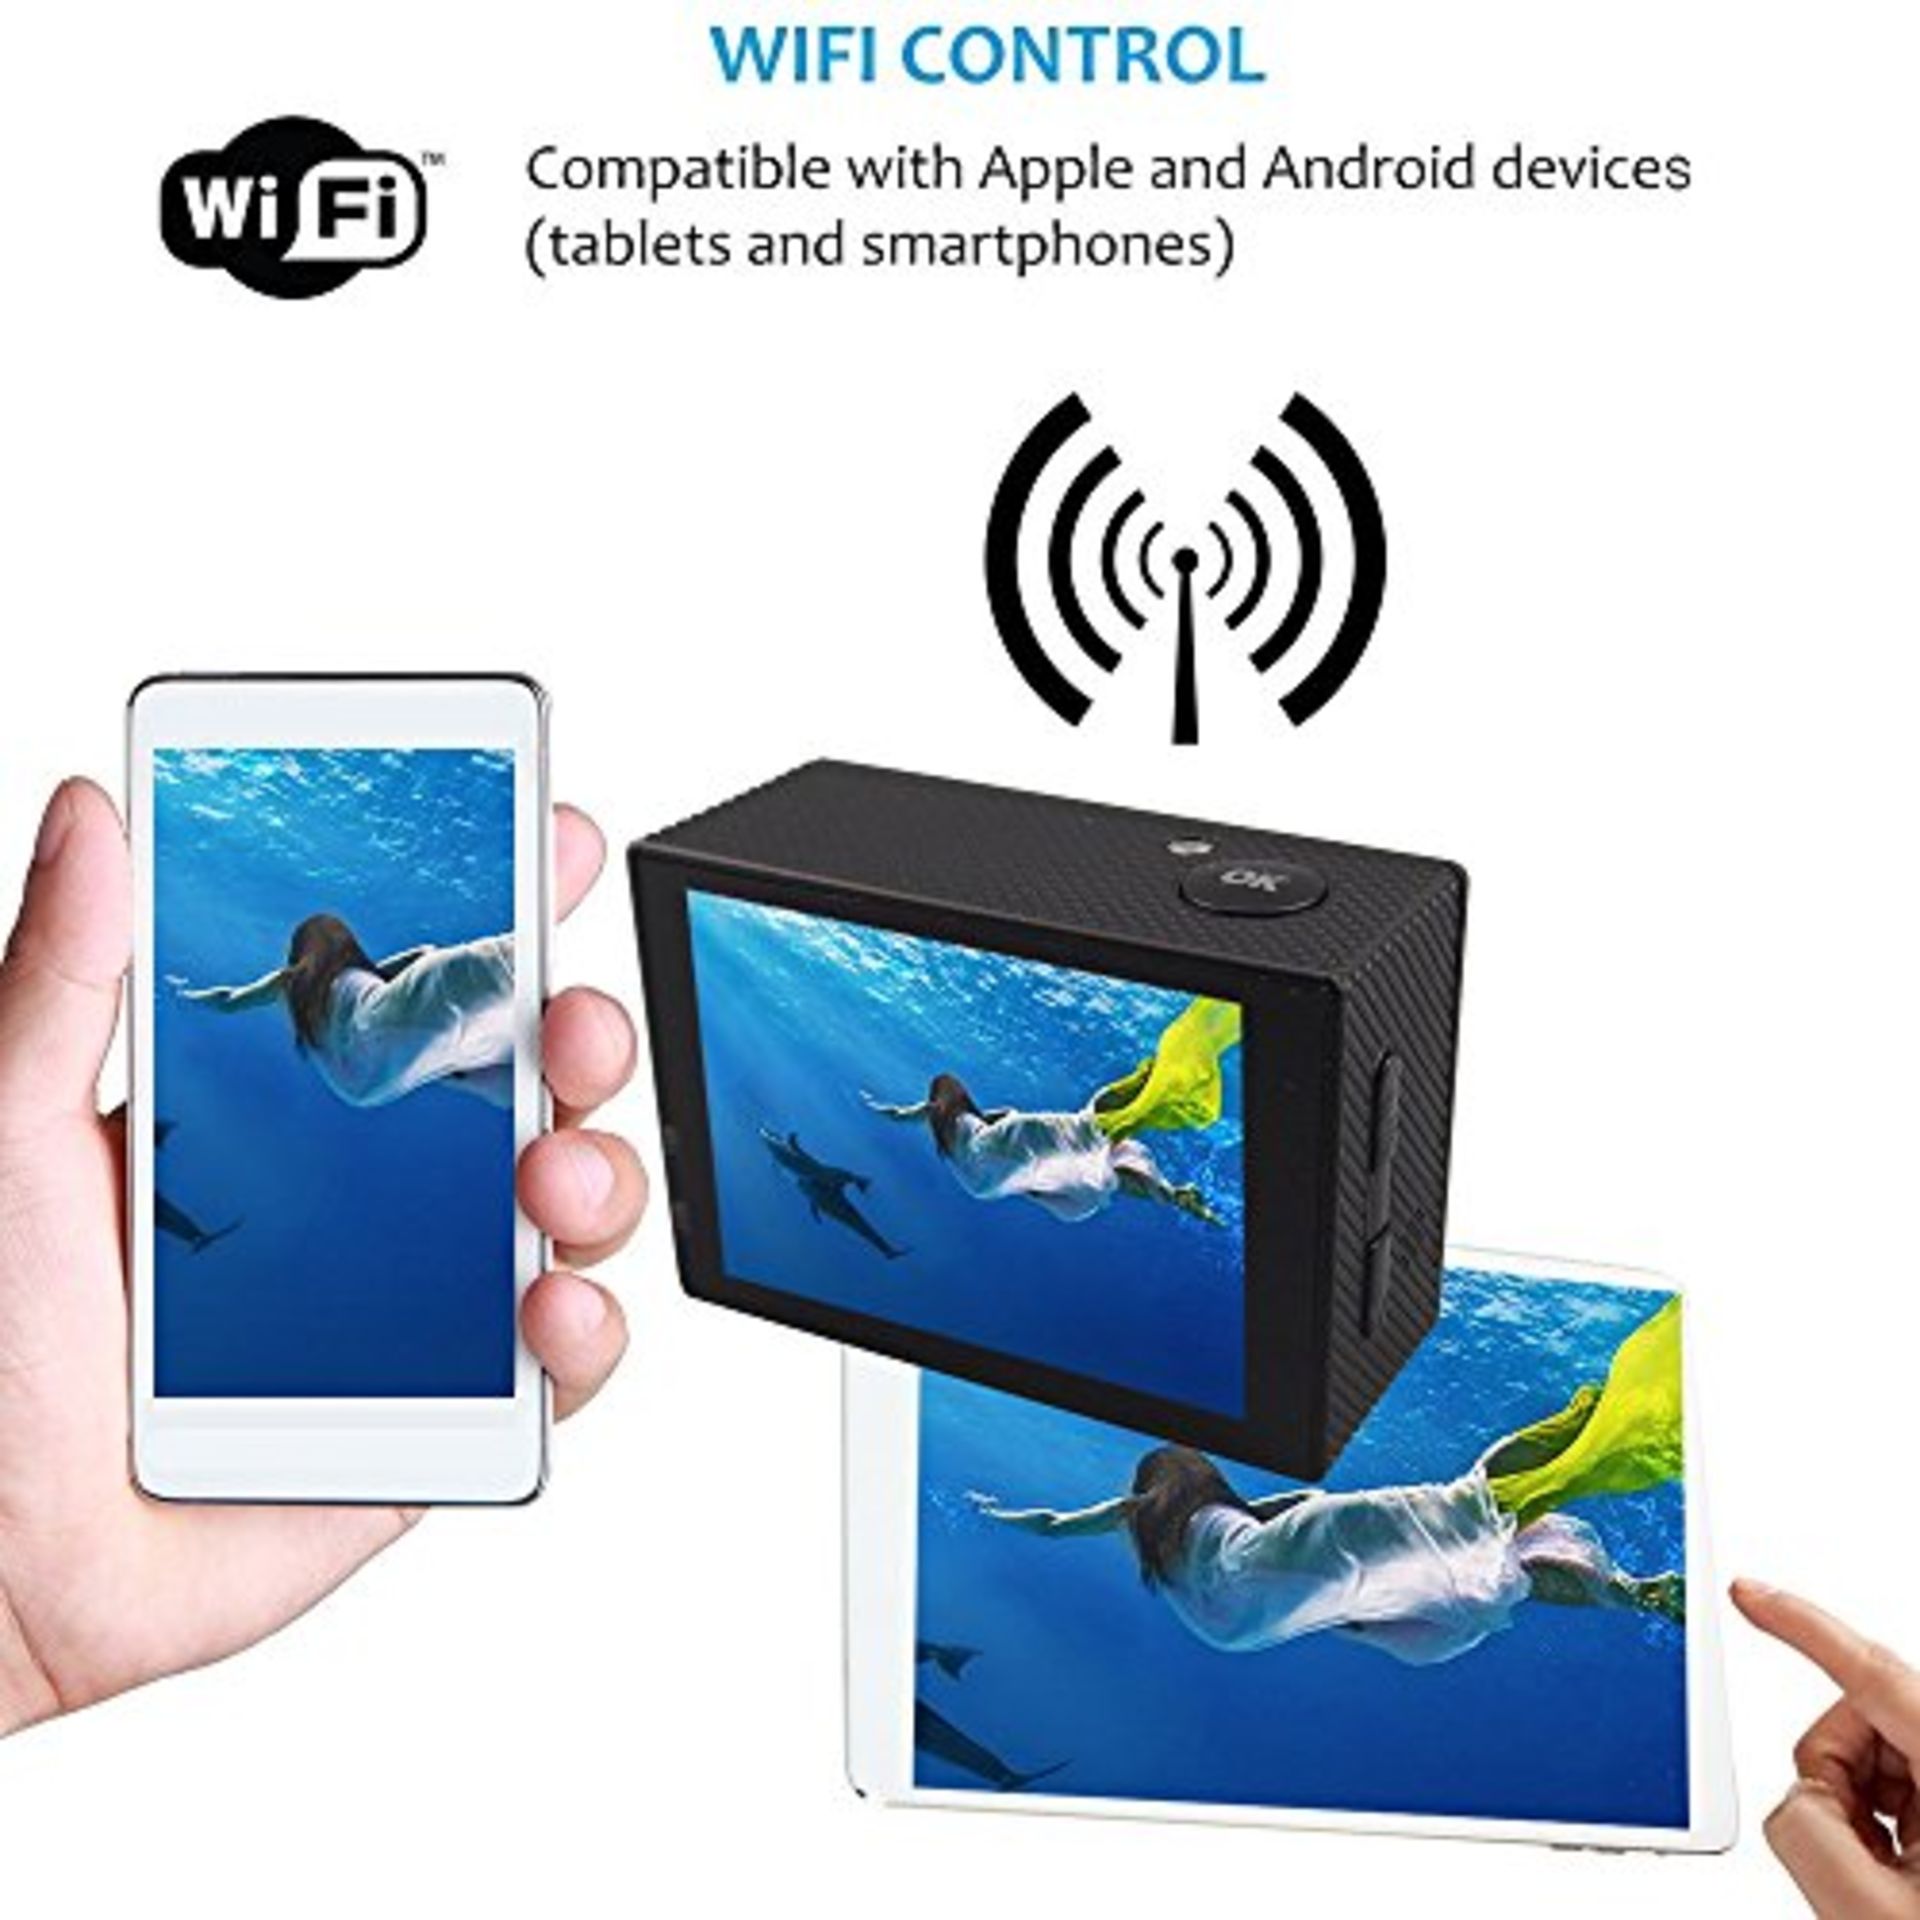 Brand New Full Ultra HD 4K Waterproof WiFi Action Camera With Audio - Box And Accessories - 30m - Image 2 of 2